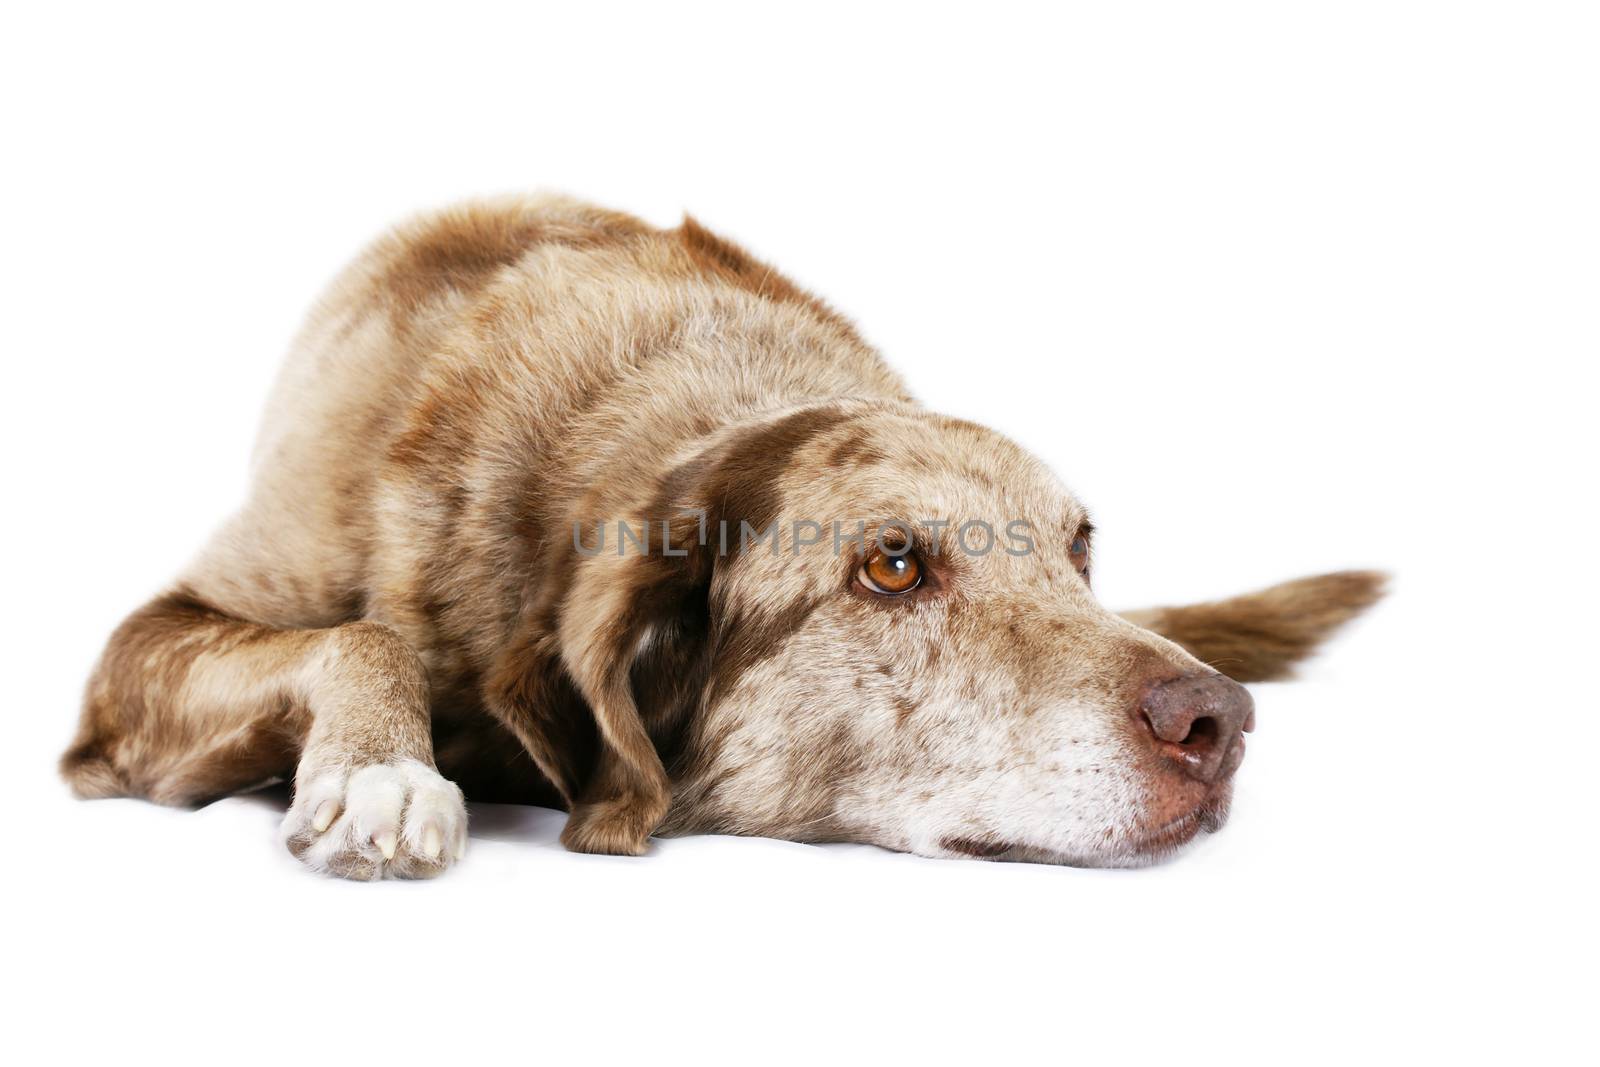 Funny looking dog laying down and looking up on white